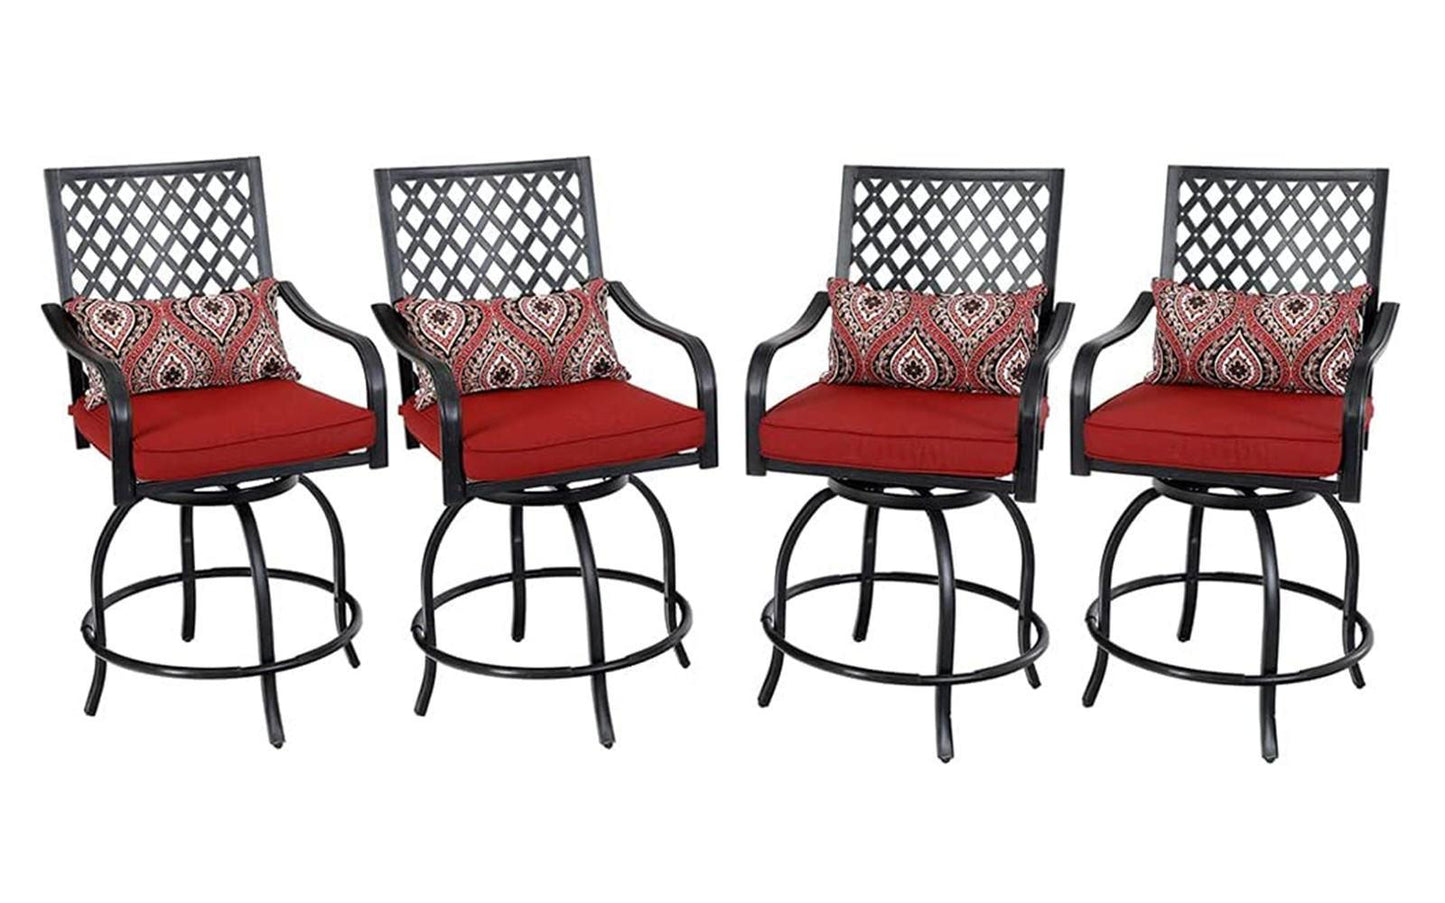 Sophia & William 4 Pieces Outdoor Metal Swivel Bar Stools with Red Cushions